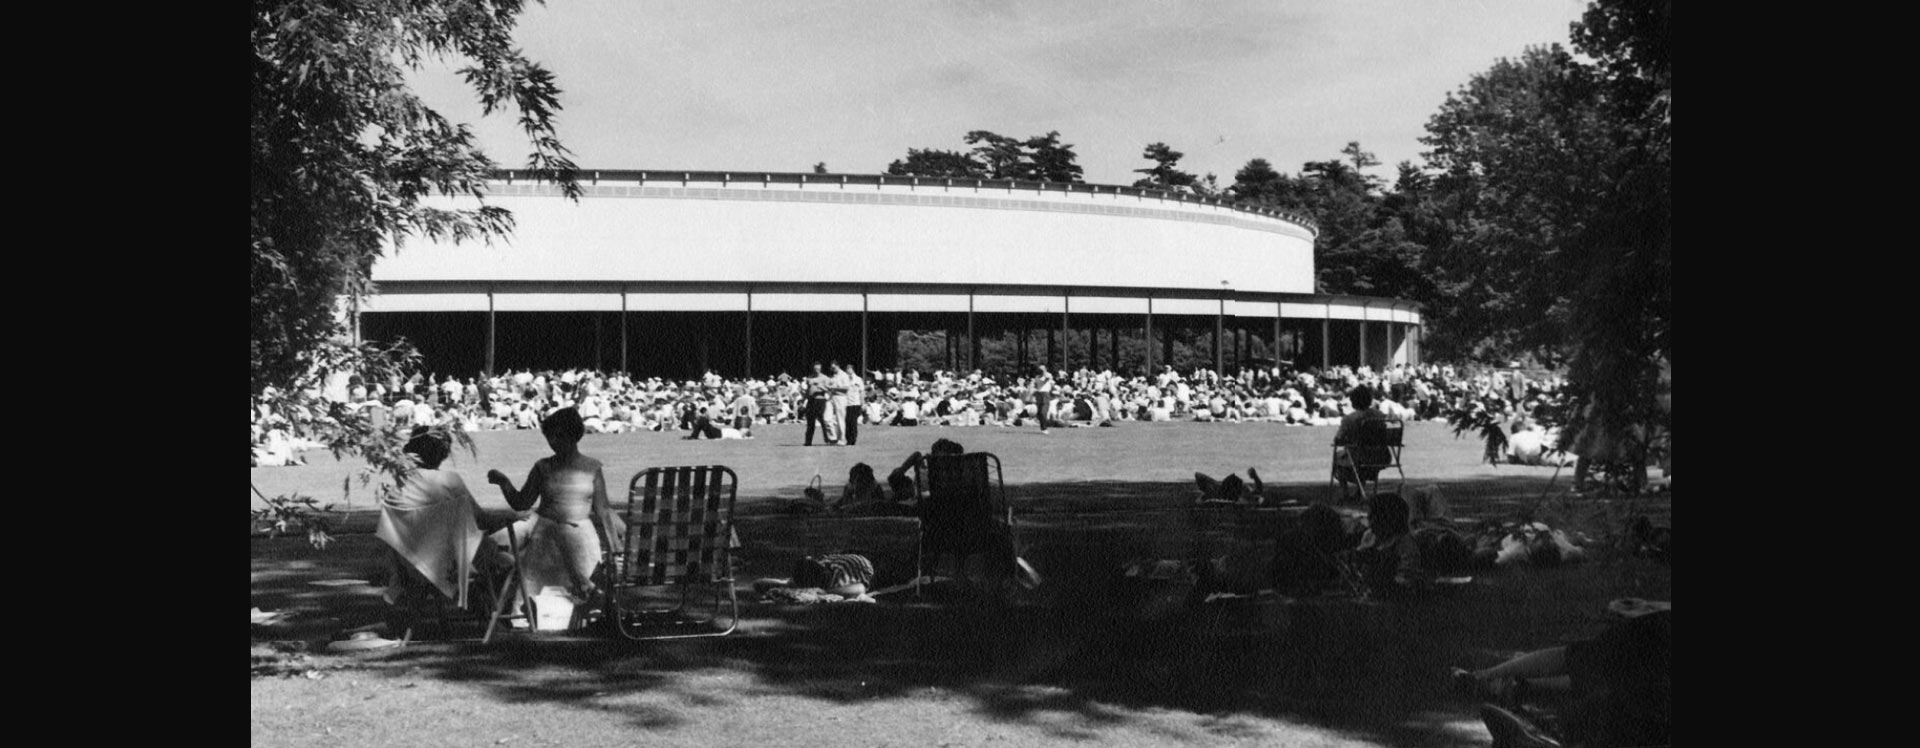 Tanglewood Shed with lawn audience, 1960. Heinz Weissenstein, photographer (Whitestone Photo)